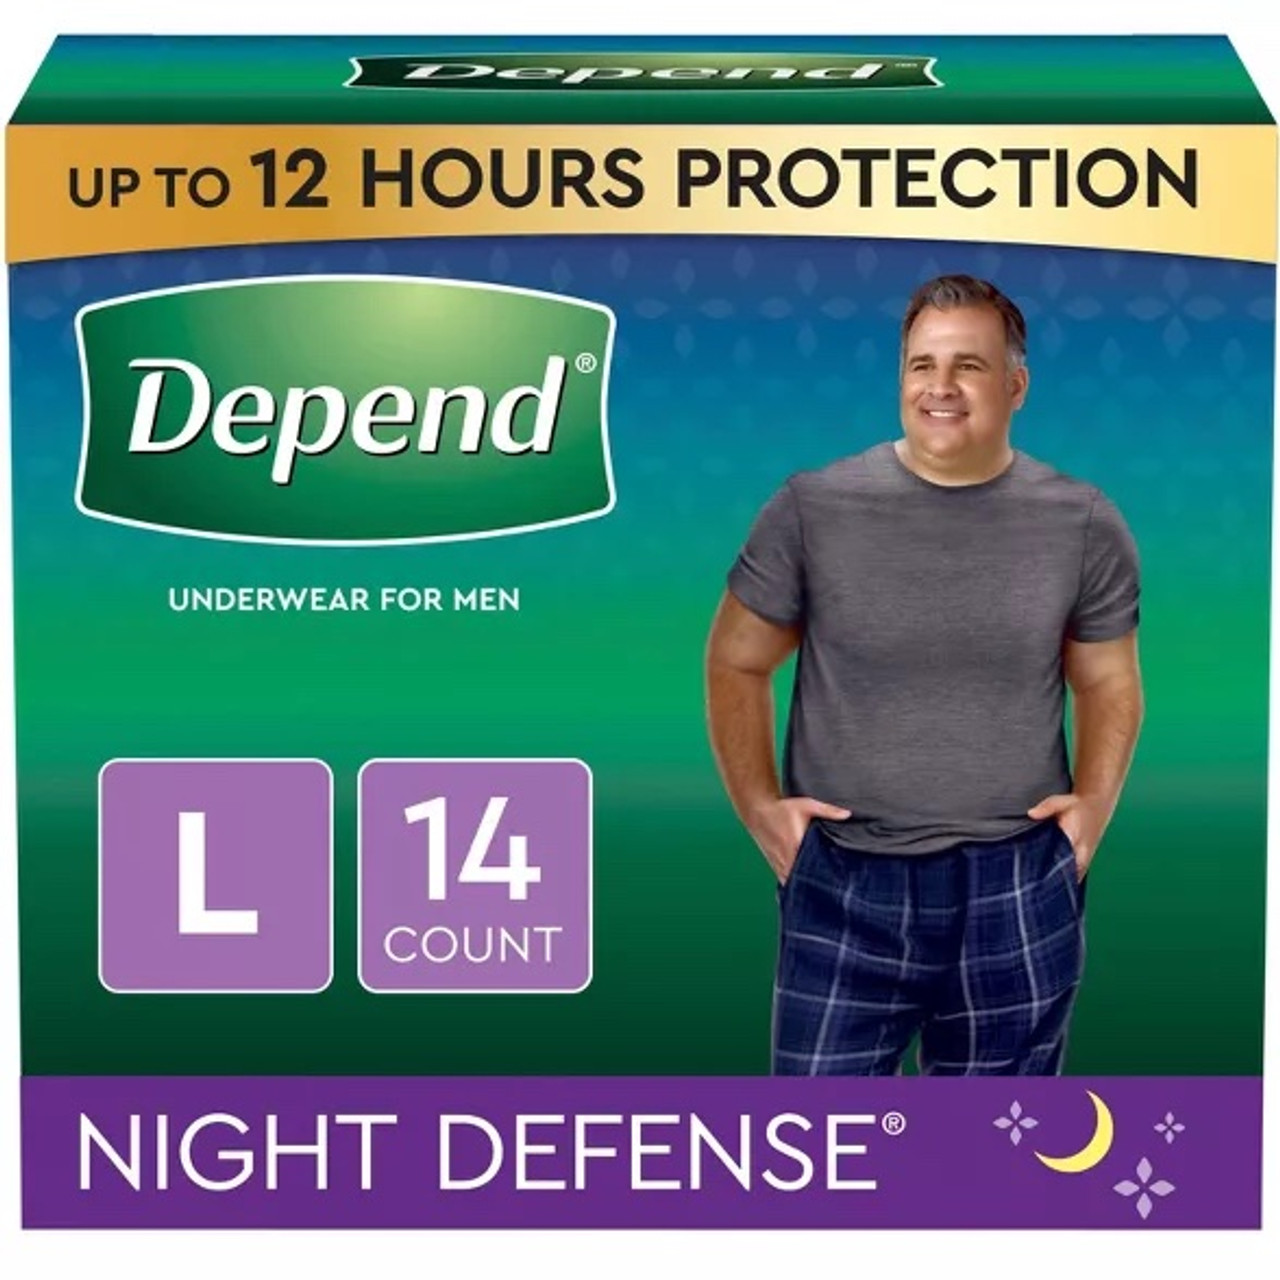 Men's Depend Fit-Flex: Sizes Small to XX-Large